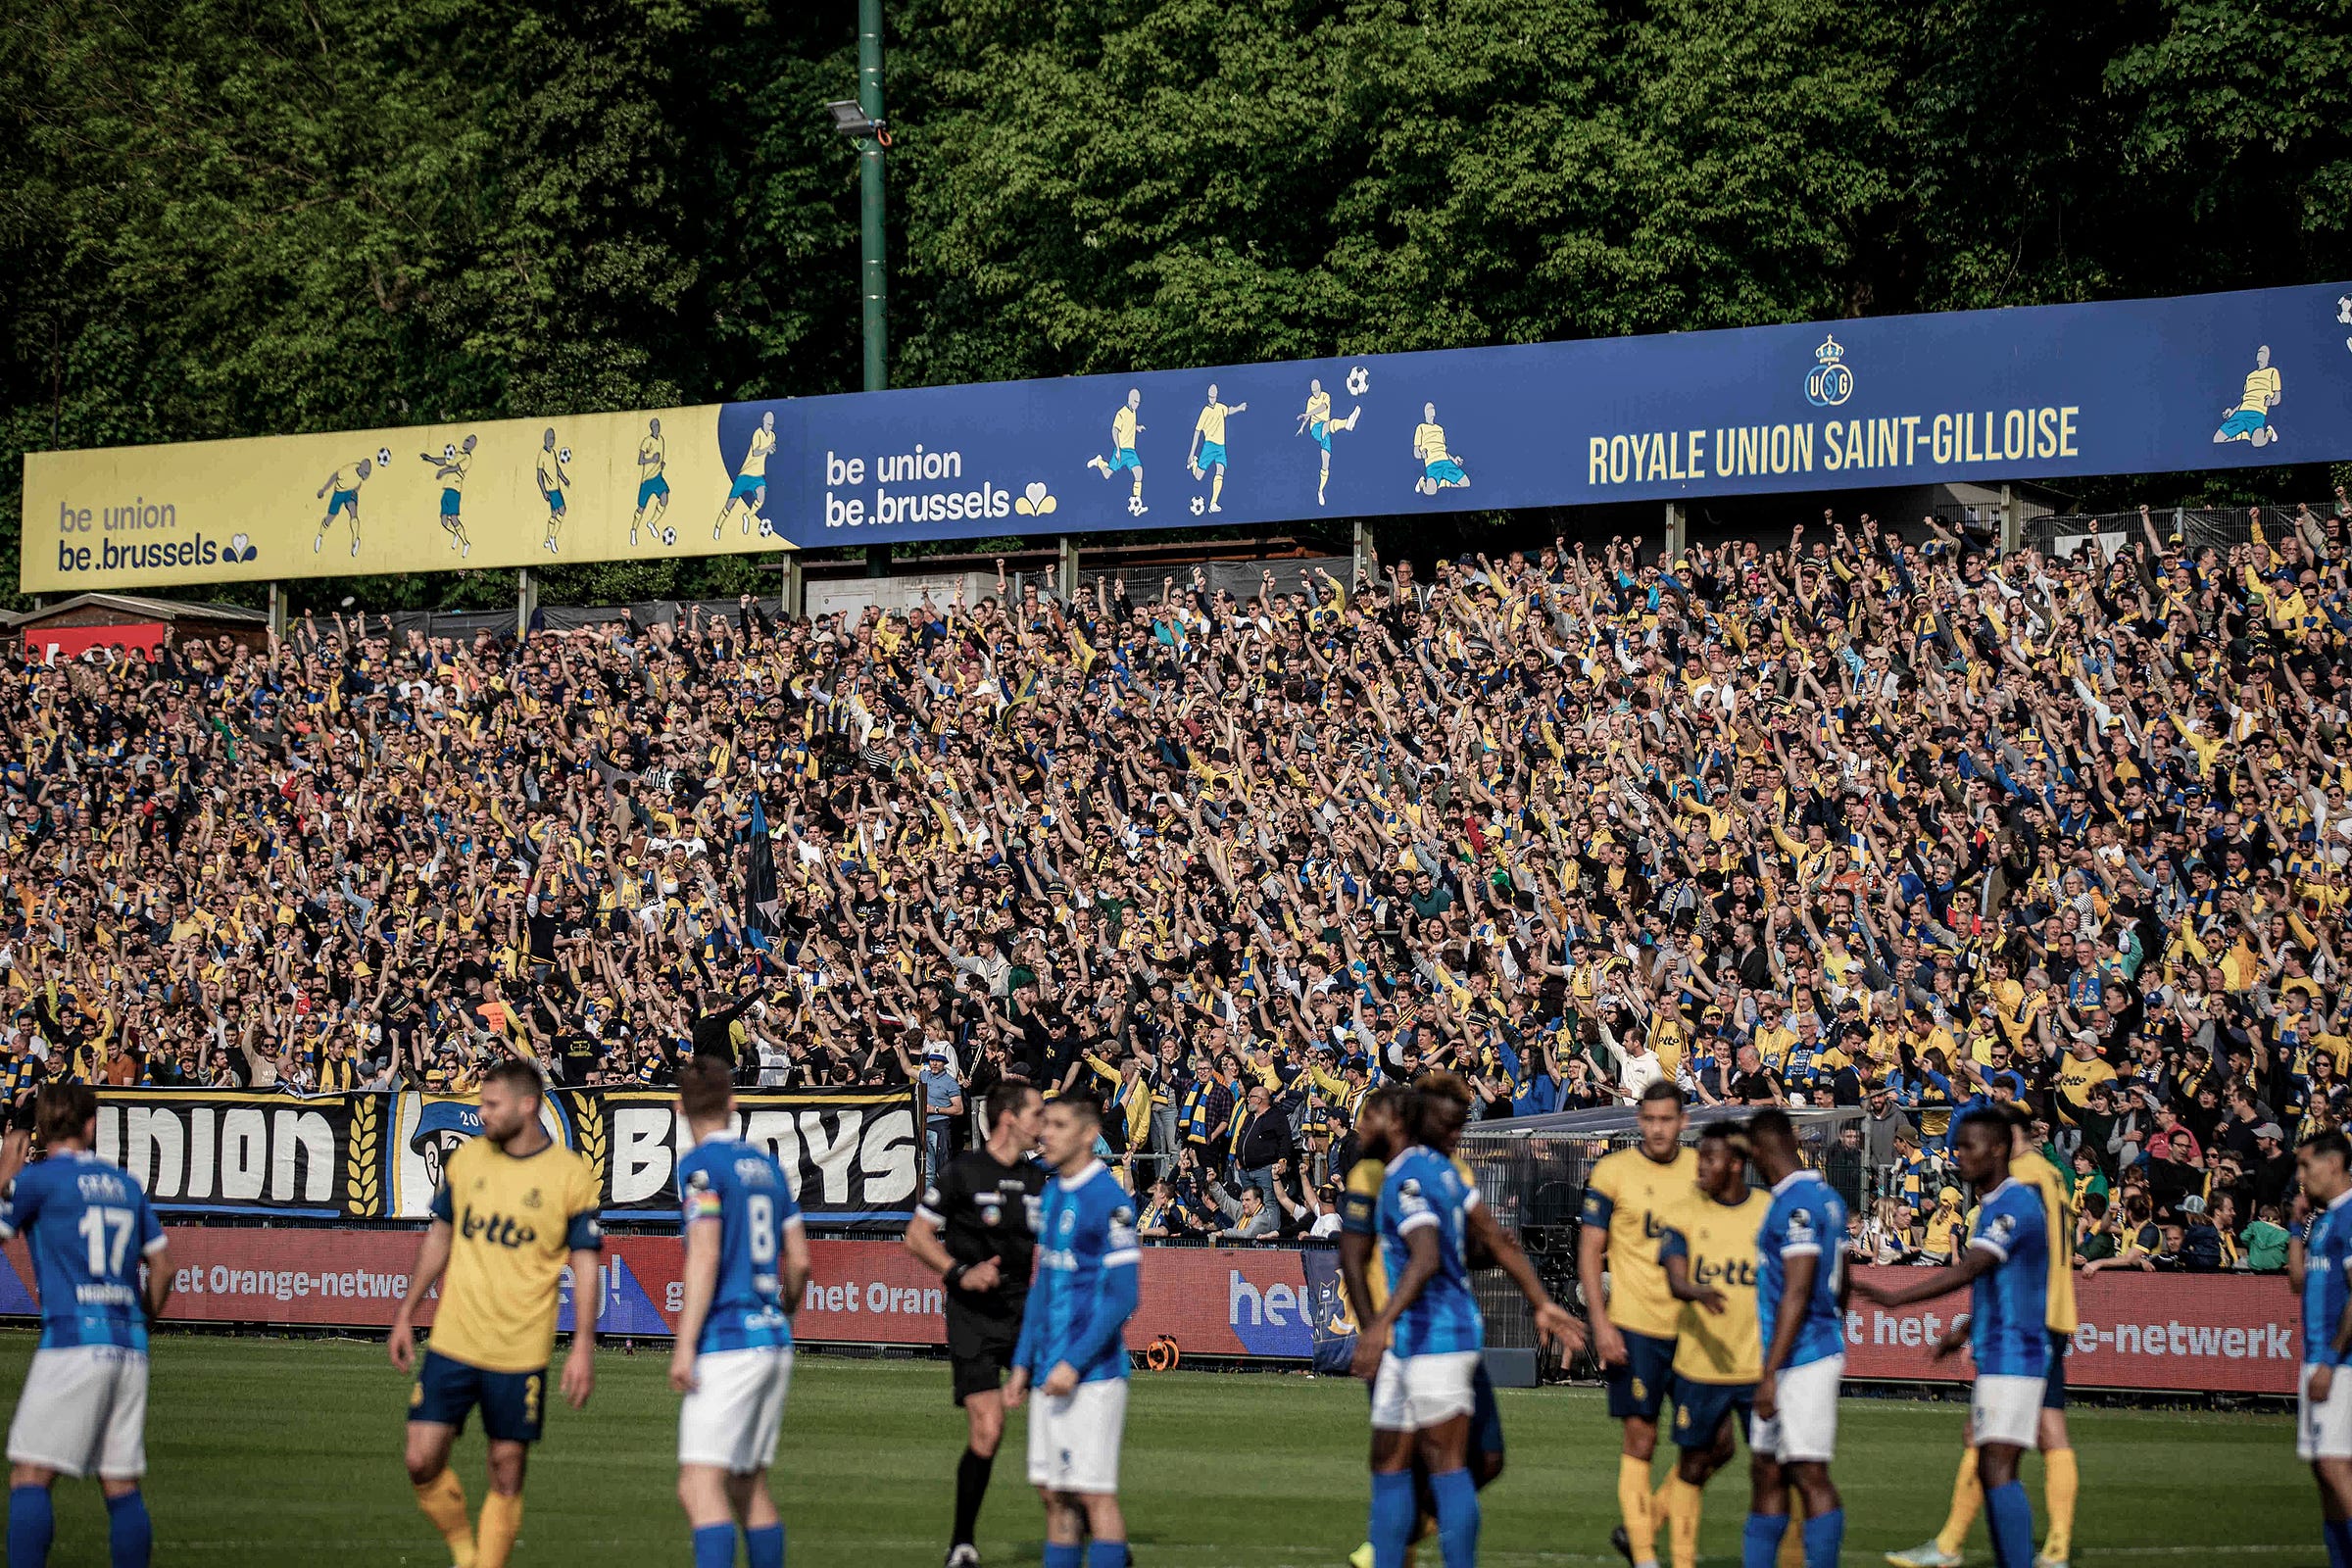 A photo of Royale Union Saint-Gilloise fans at the Stade Joseph-Marien with players in the foreground